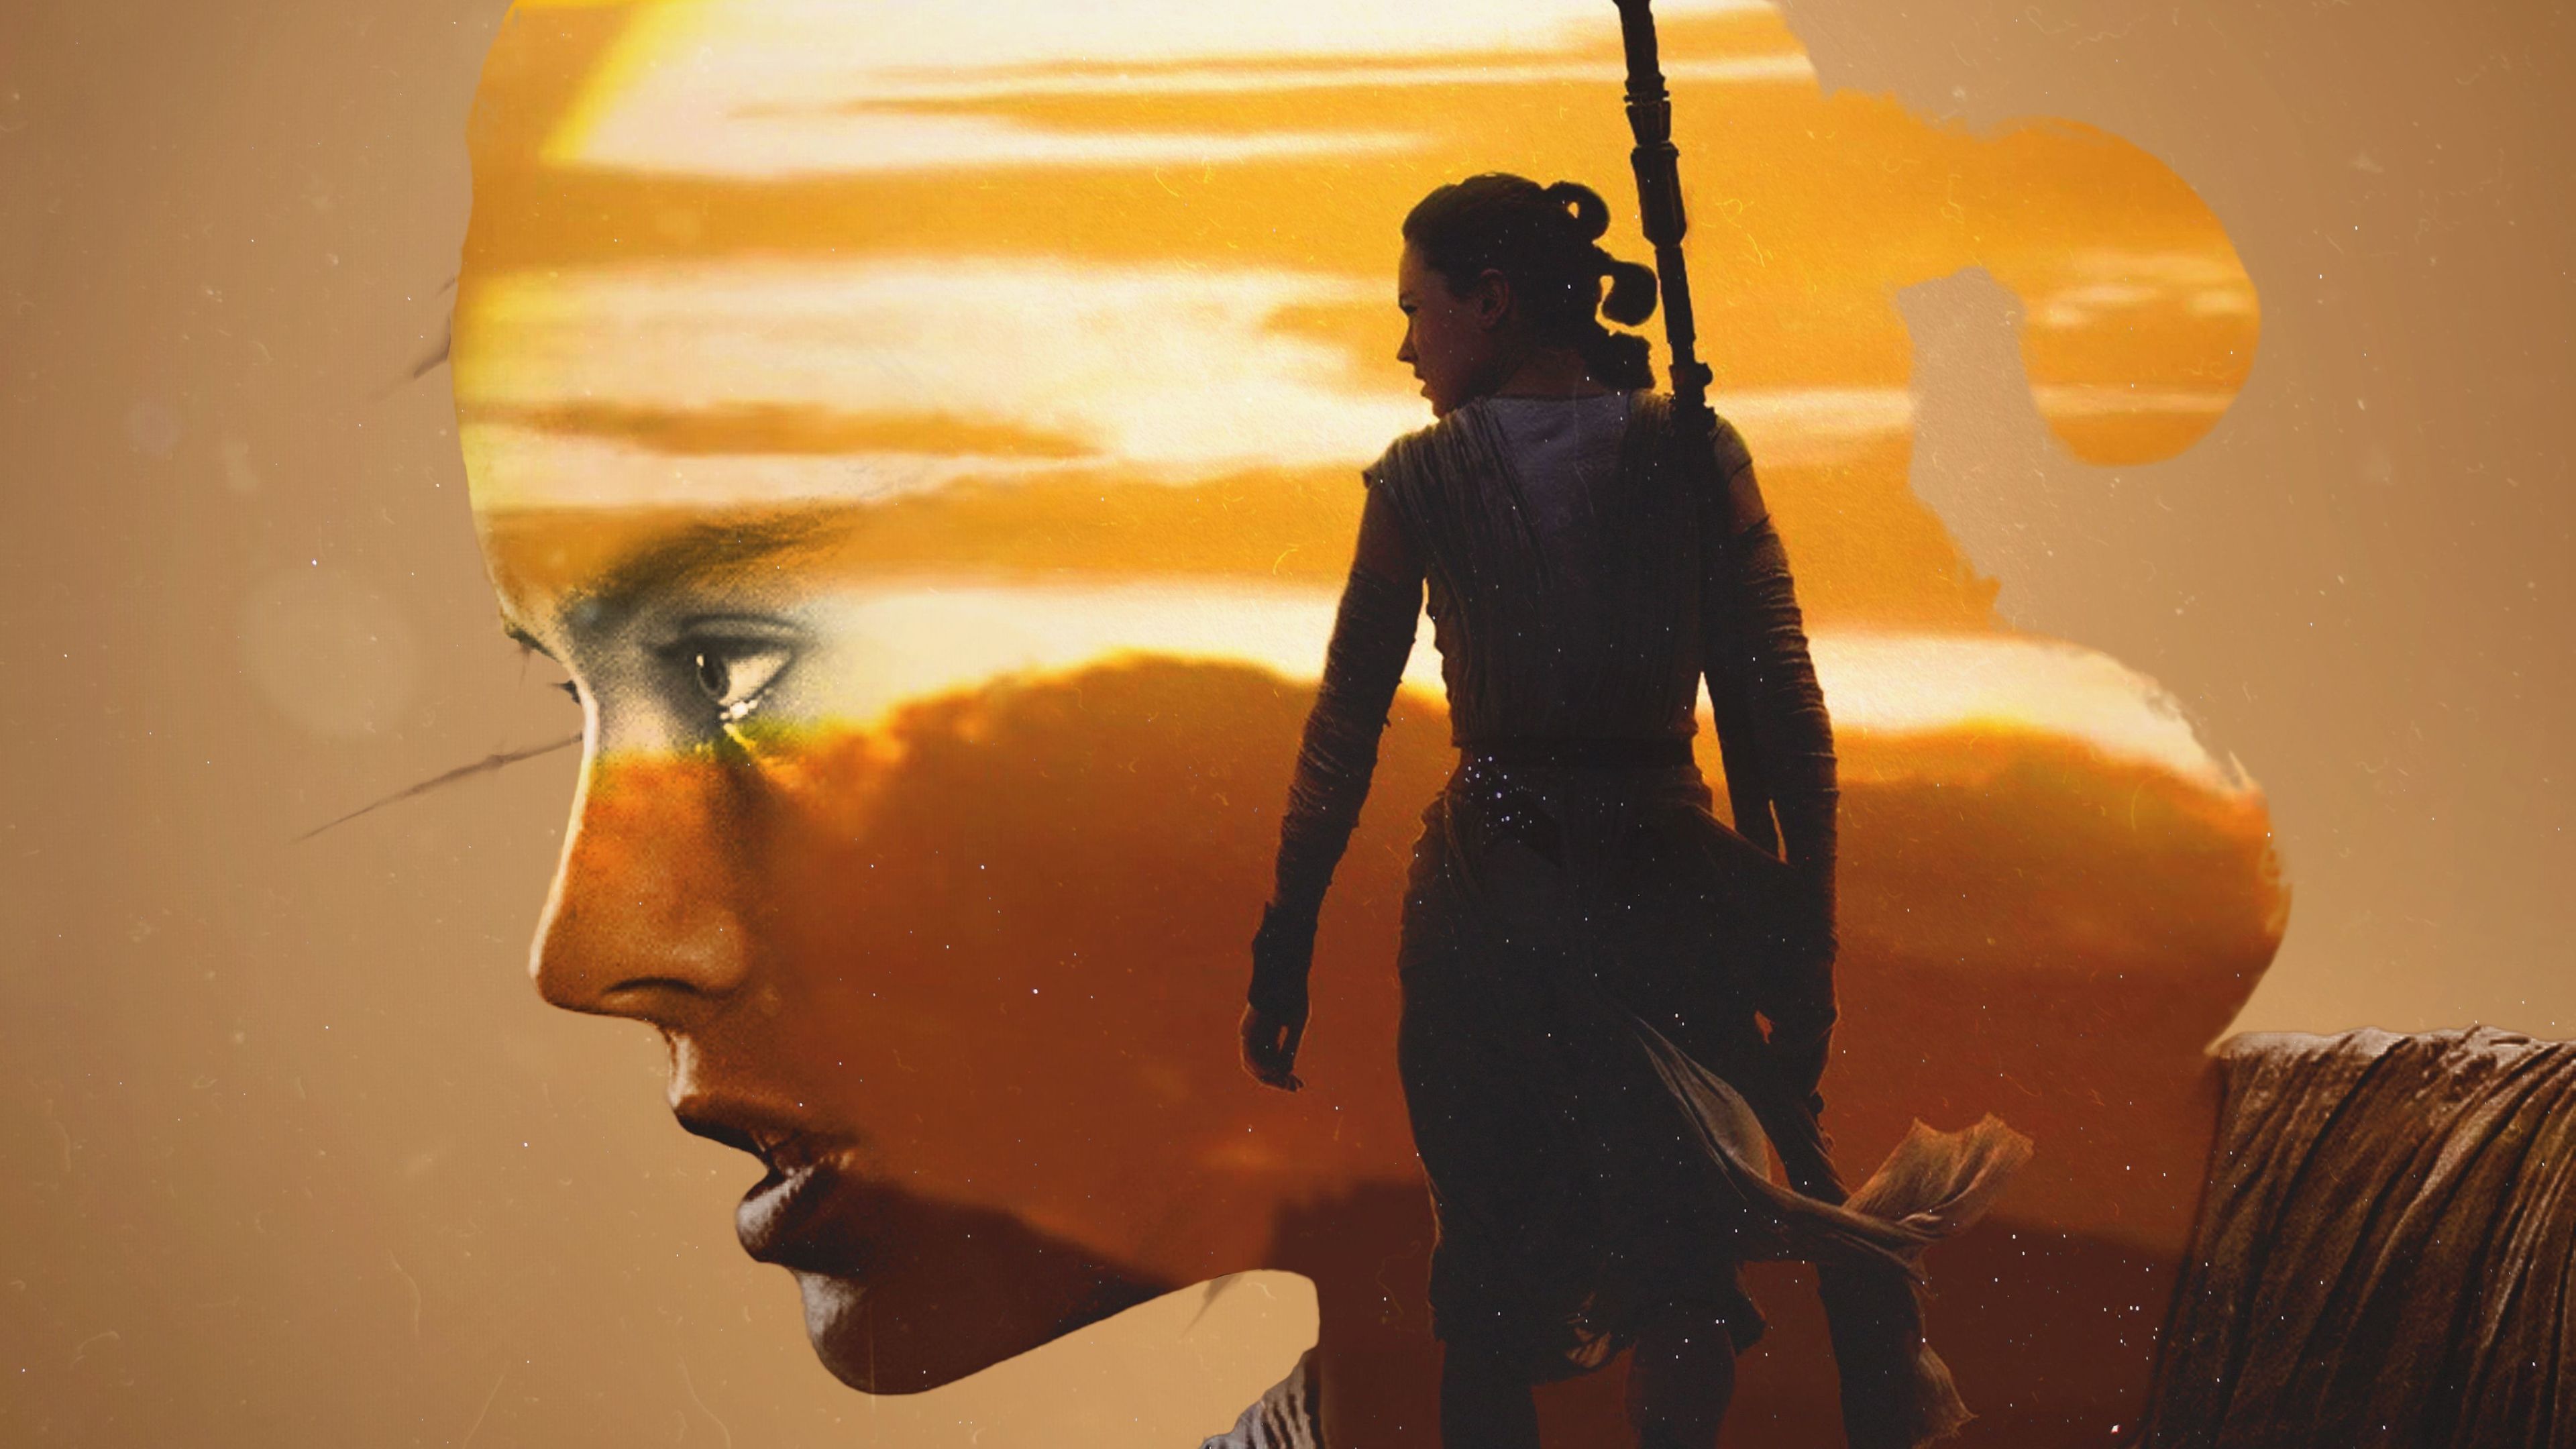 rey star wars artwork 1536401335 - Rey Star Wars Artwork - star wars wallpapers, rogue one a star wars story wallpapers, movies wallpapers, artwork wallpapers, 2016 movies wallpapers